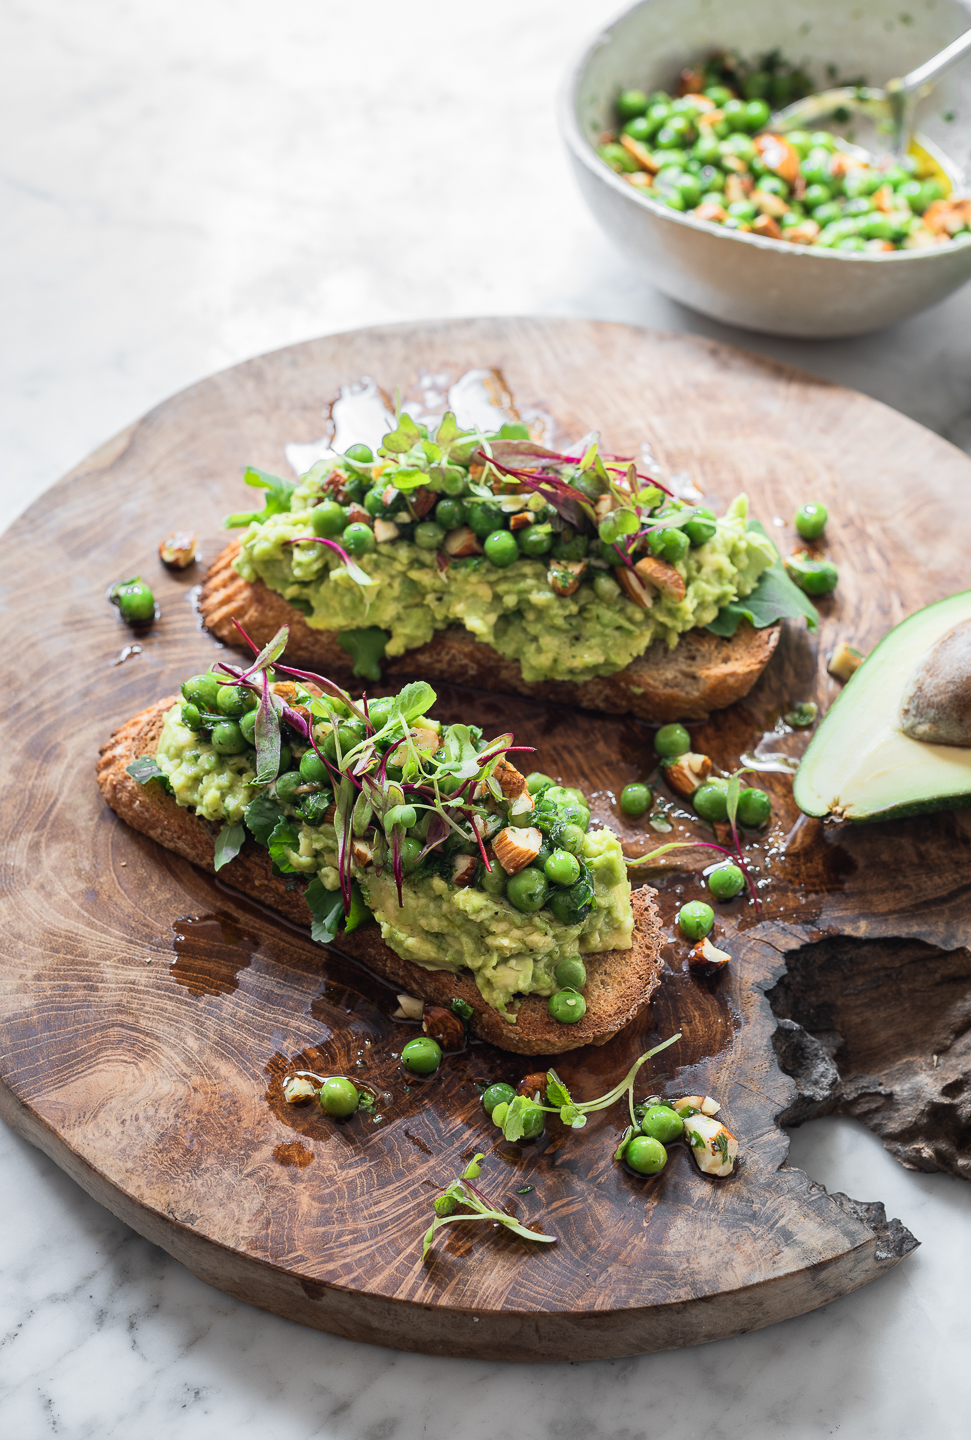 Avocado Toast with minted pea and almond salsa